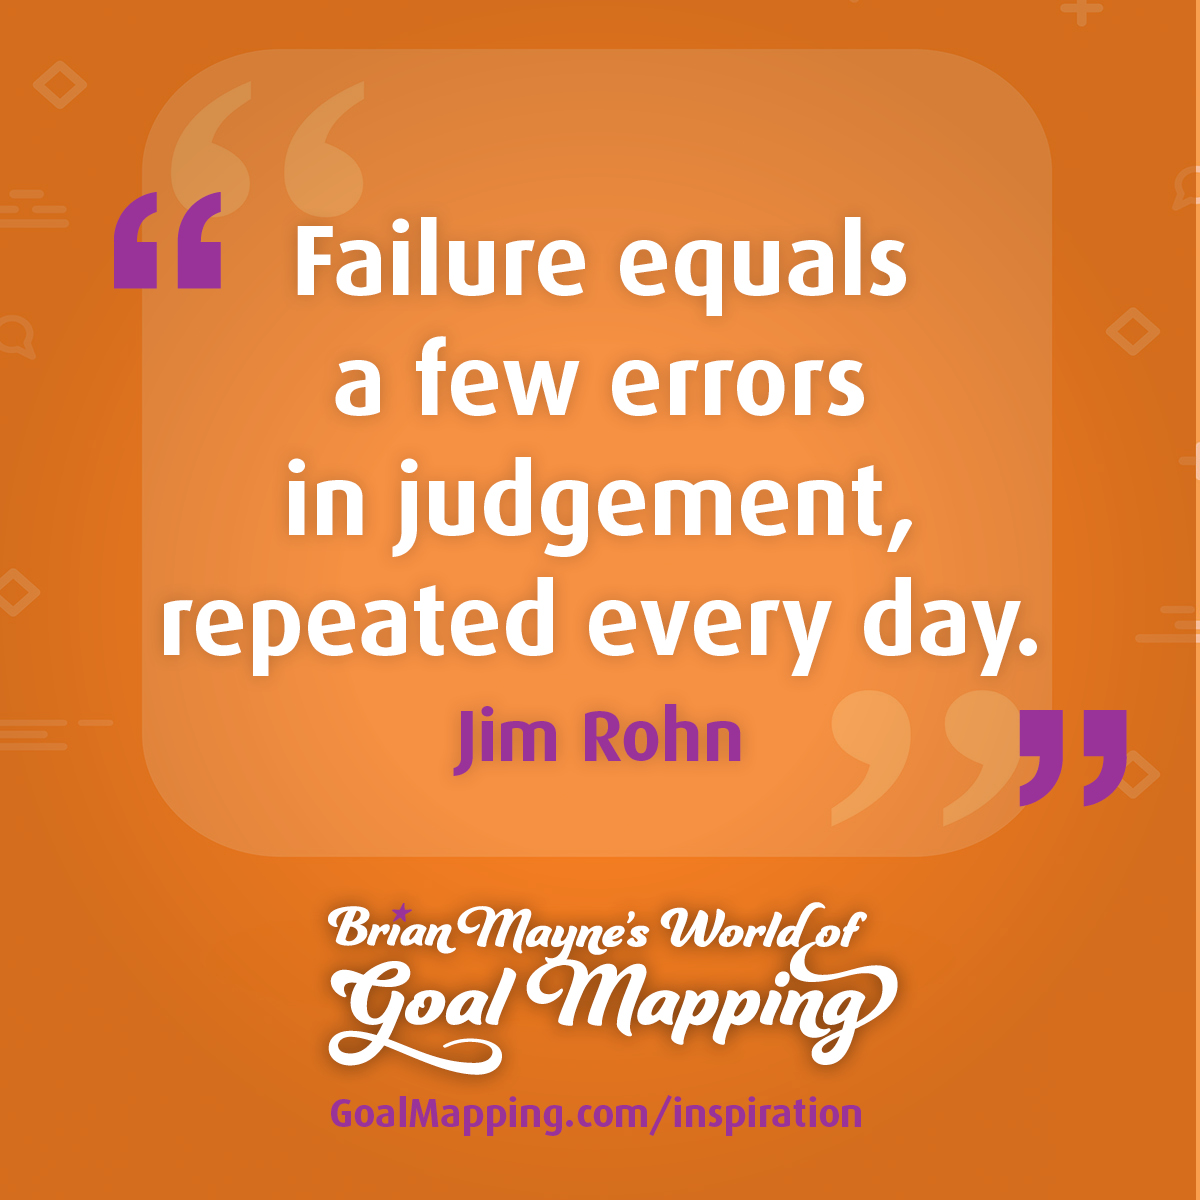 "Failure equals a few errors in judgement, repeated every day." Jim Rohn